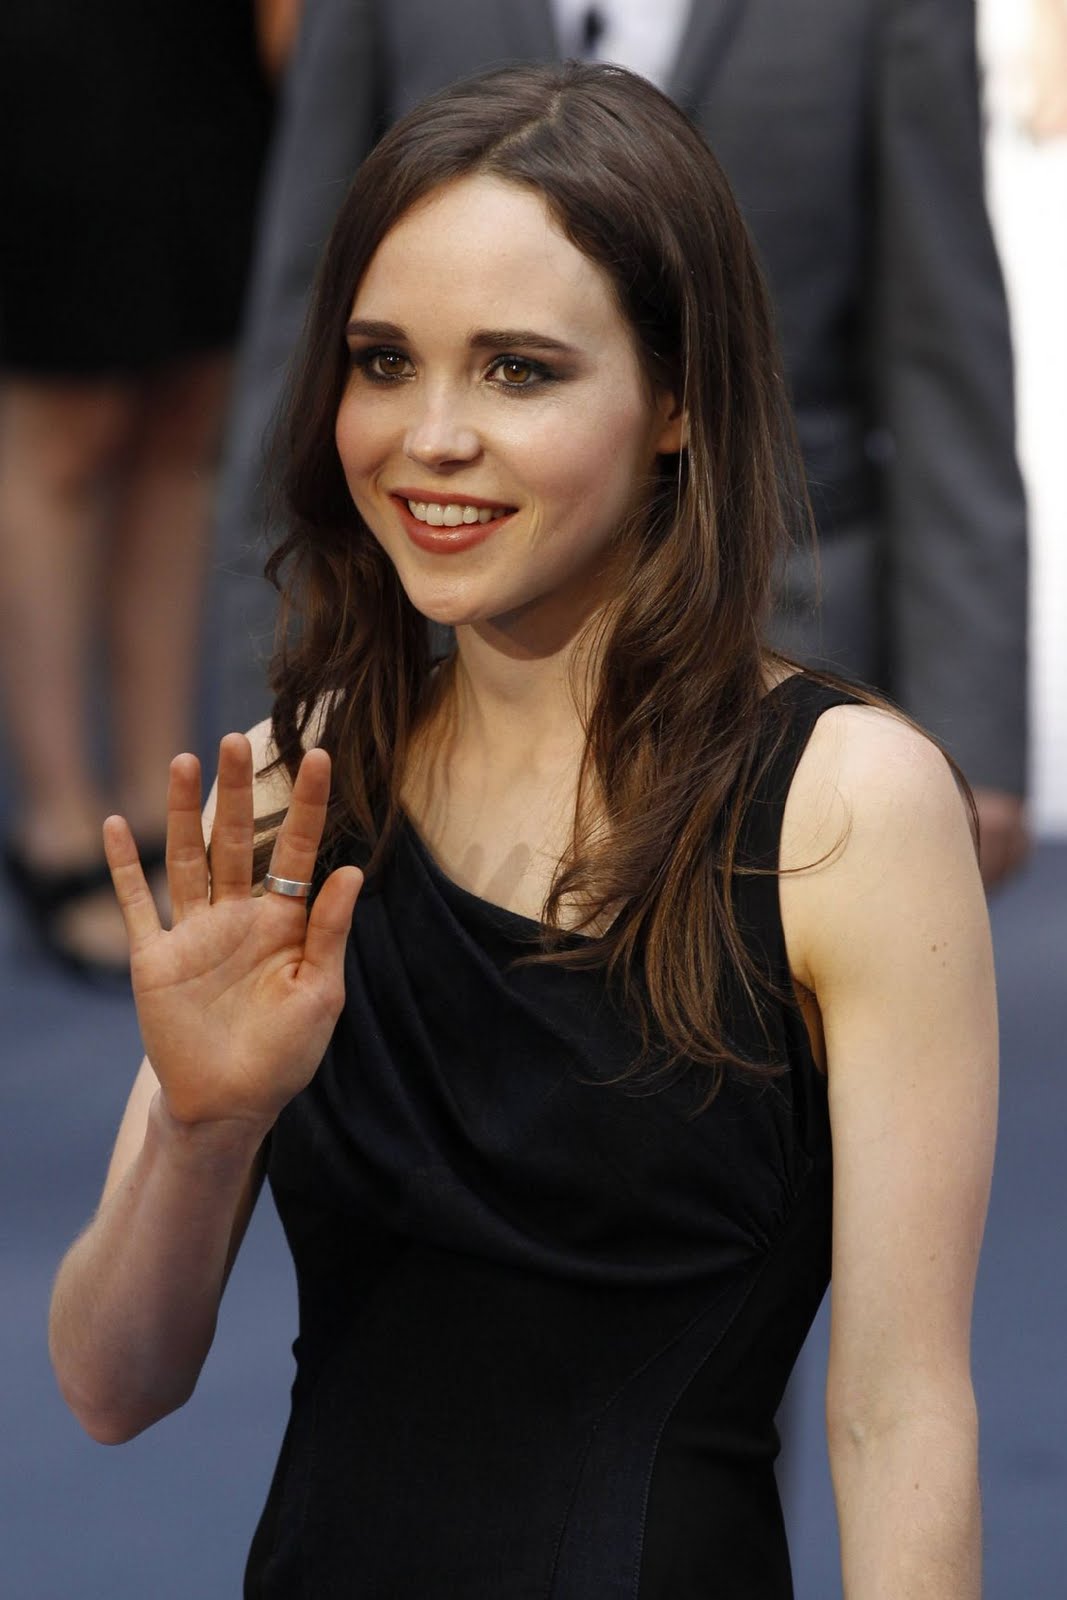 latest trends in fashion: Actress: Ellen Page